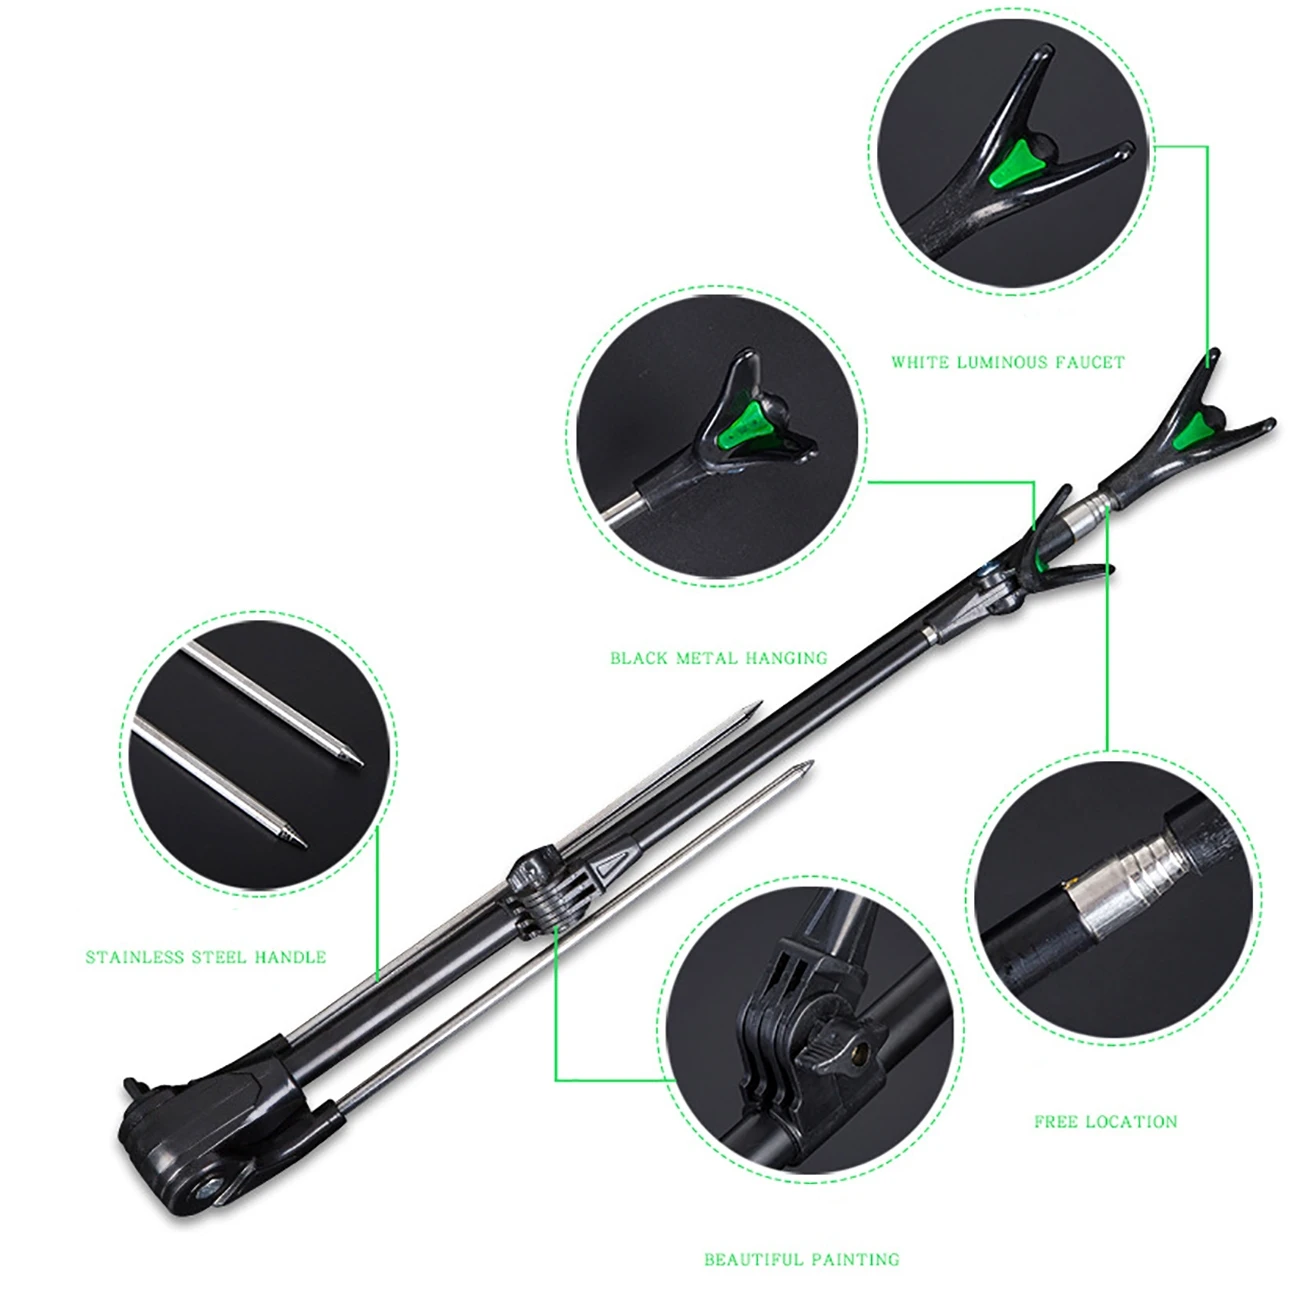 2.4M 1.7M Adjustable Fishing Rod Bracket Stainless Steel Telescopic Holder 360° Support Stand Foldable Fishing Tools Accessories enlarge